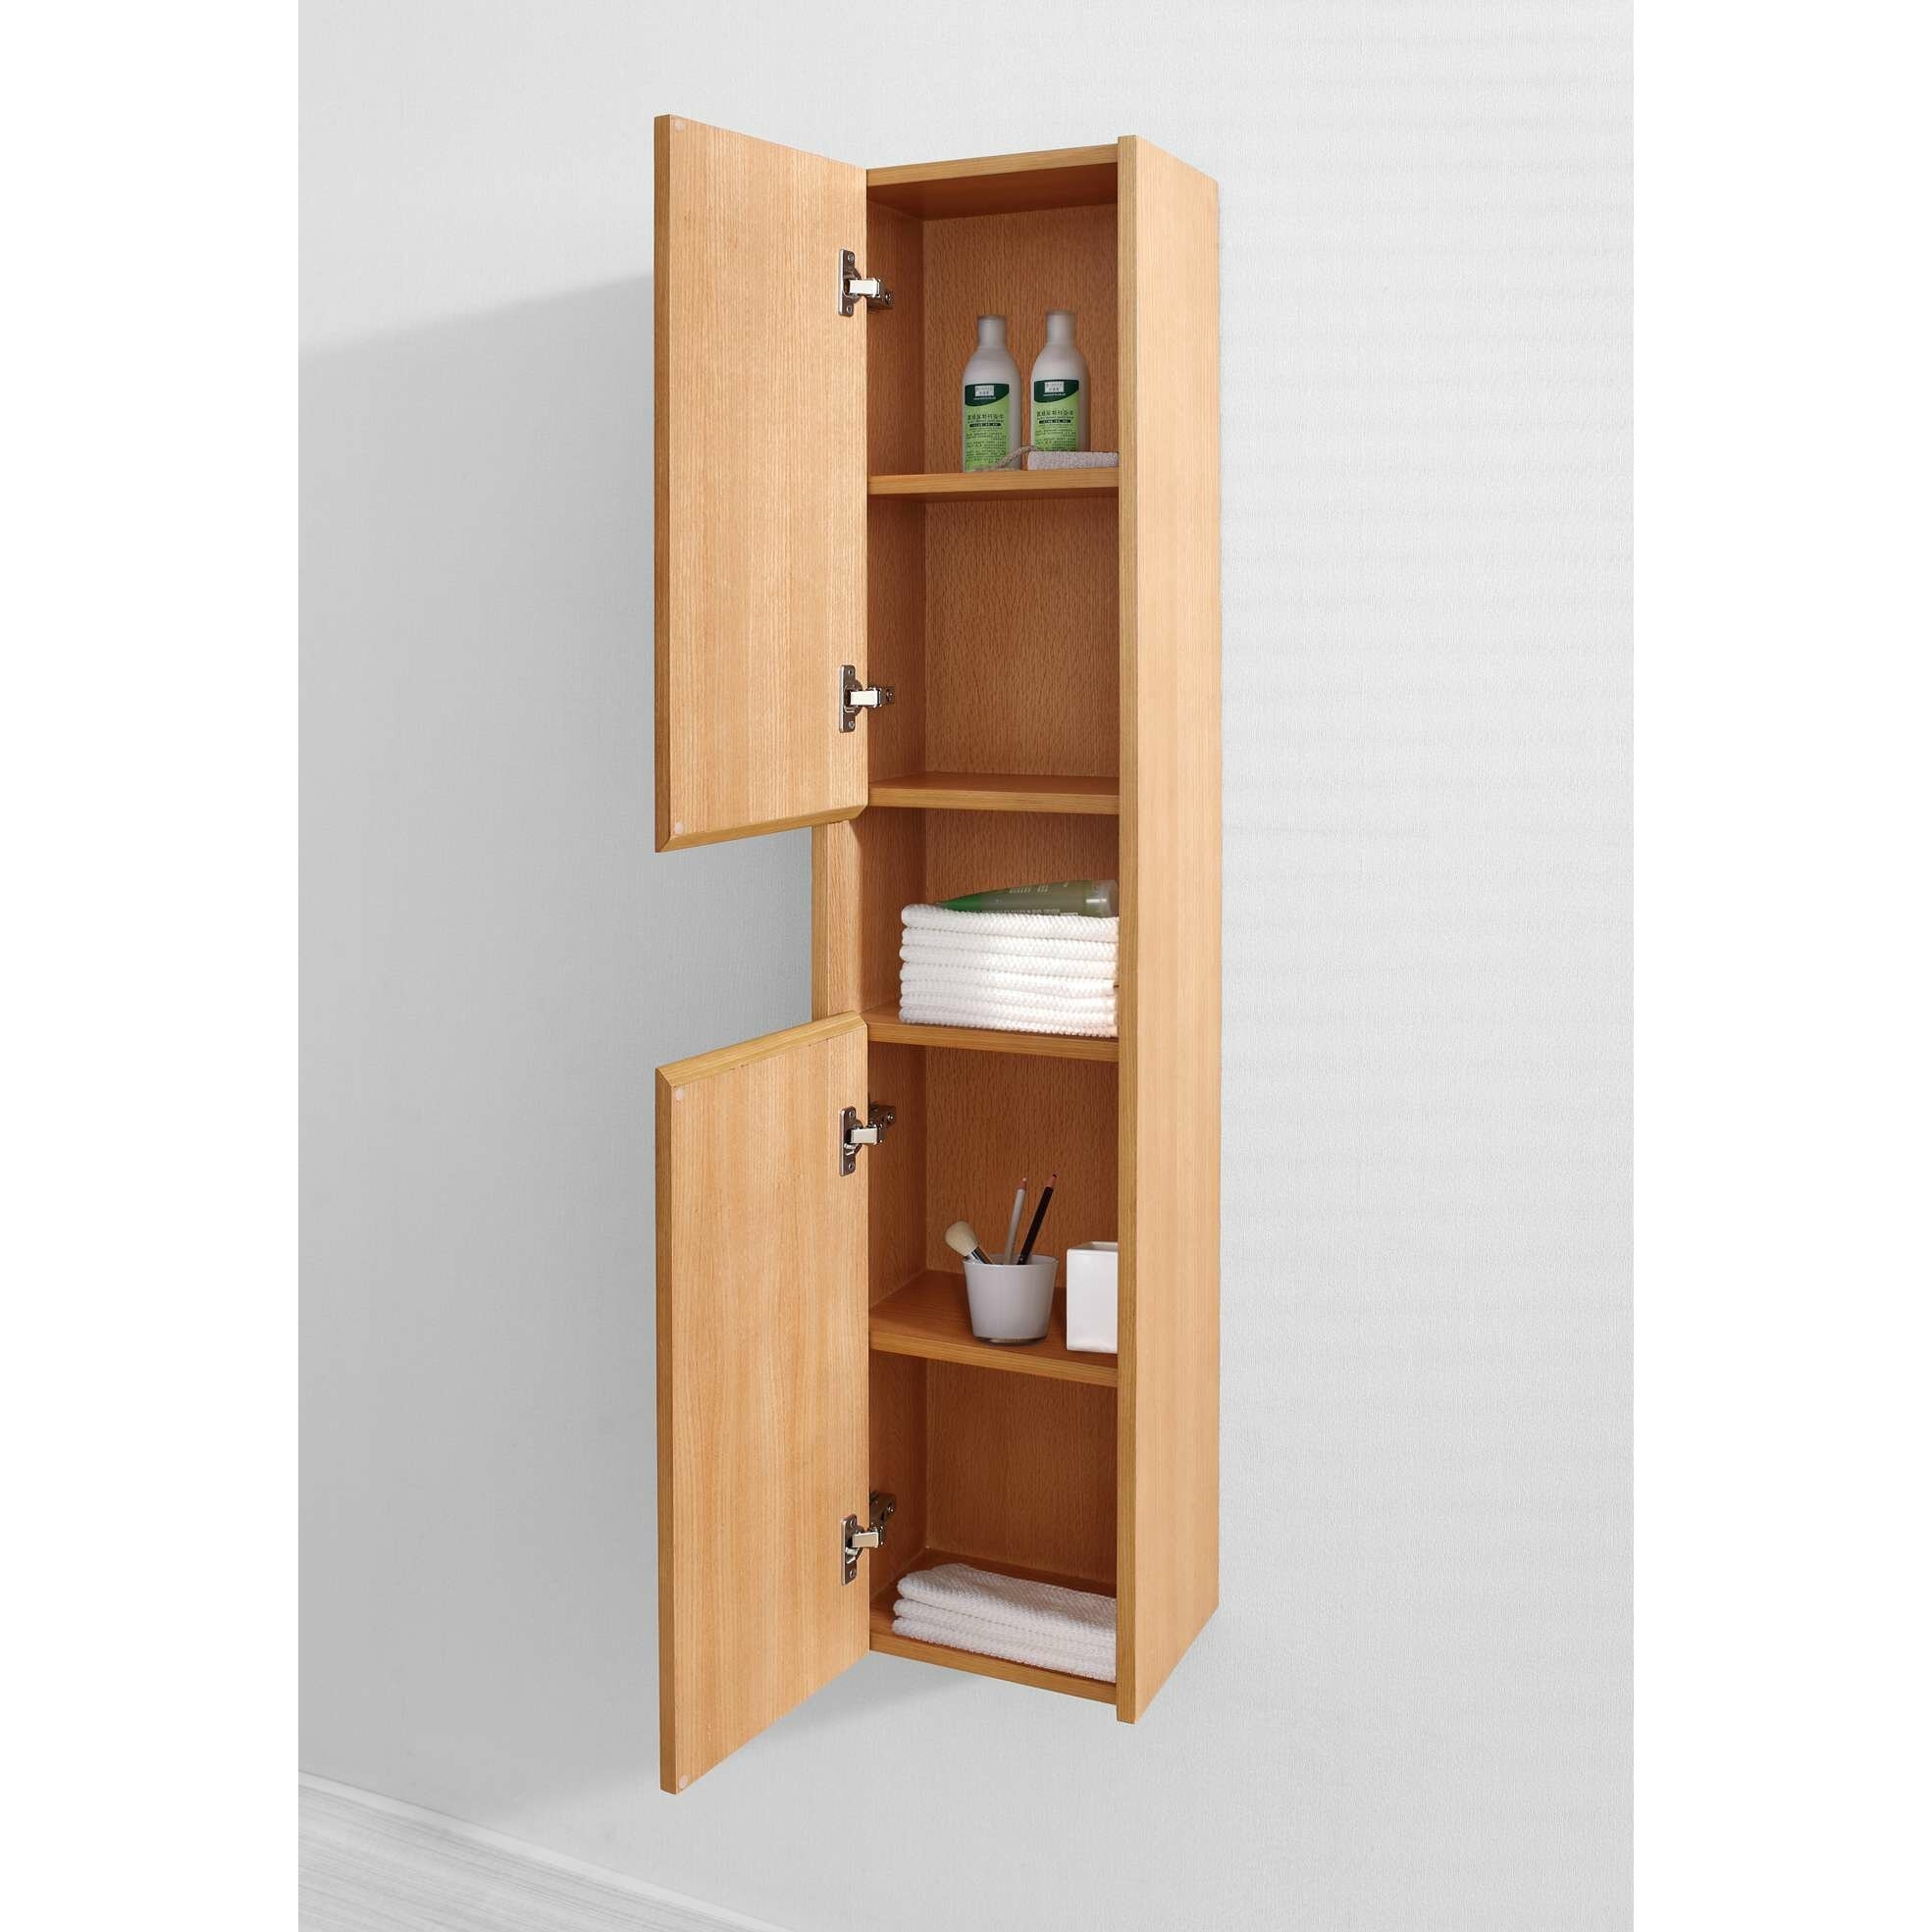 Wall mounted linen cabinet 8